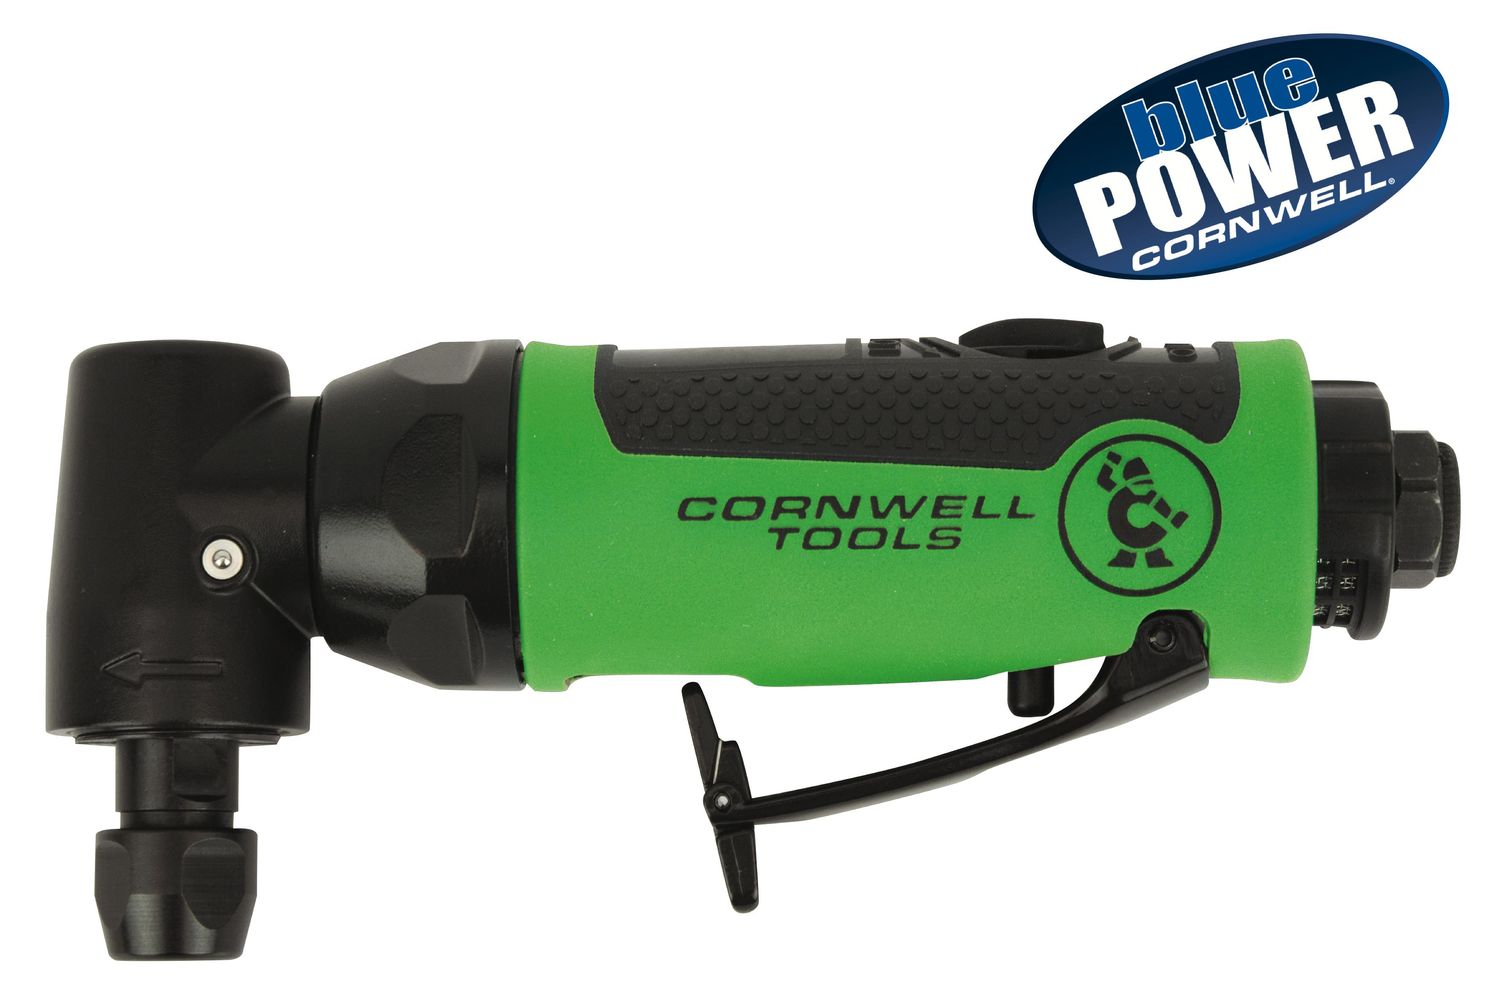 CAT540RG - Cornwell® bluePOWER® Heavy-Duty Right Angle Die Grinder